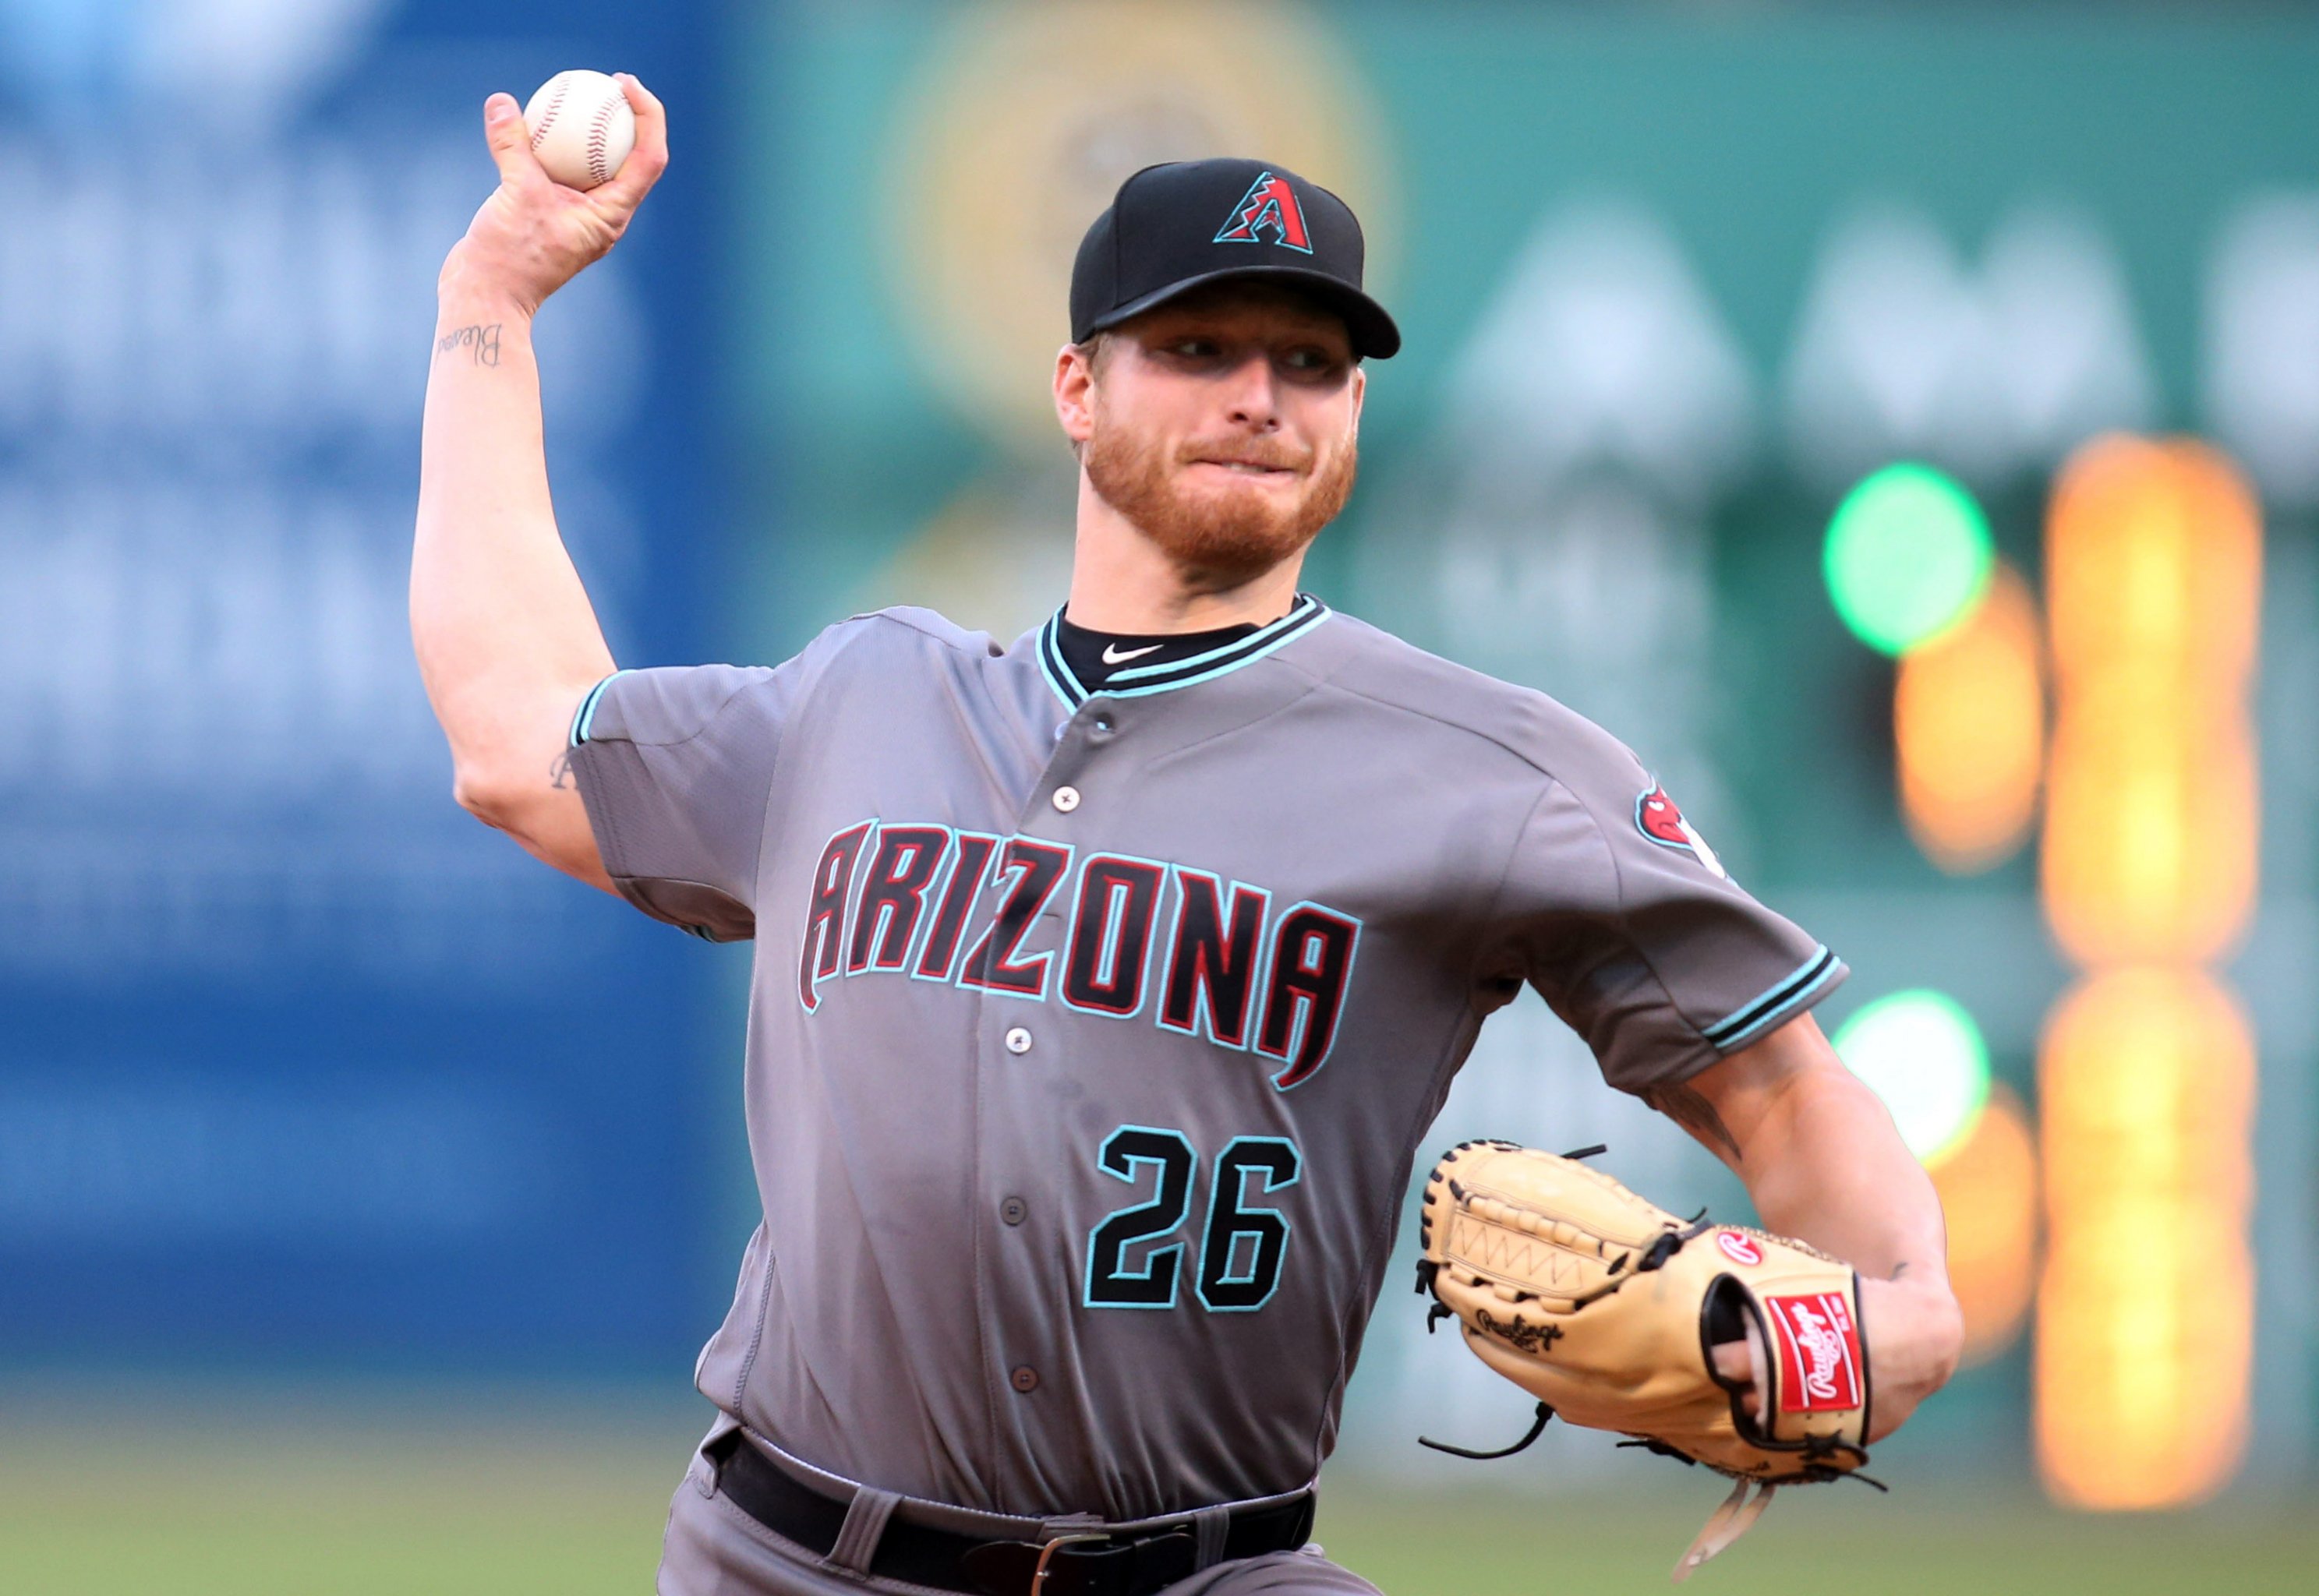 Dan Straily paces Marlins on mound, at plate in win over